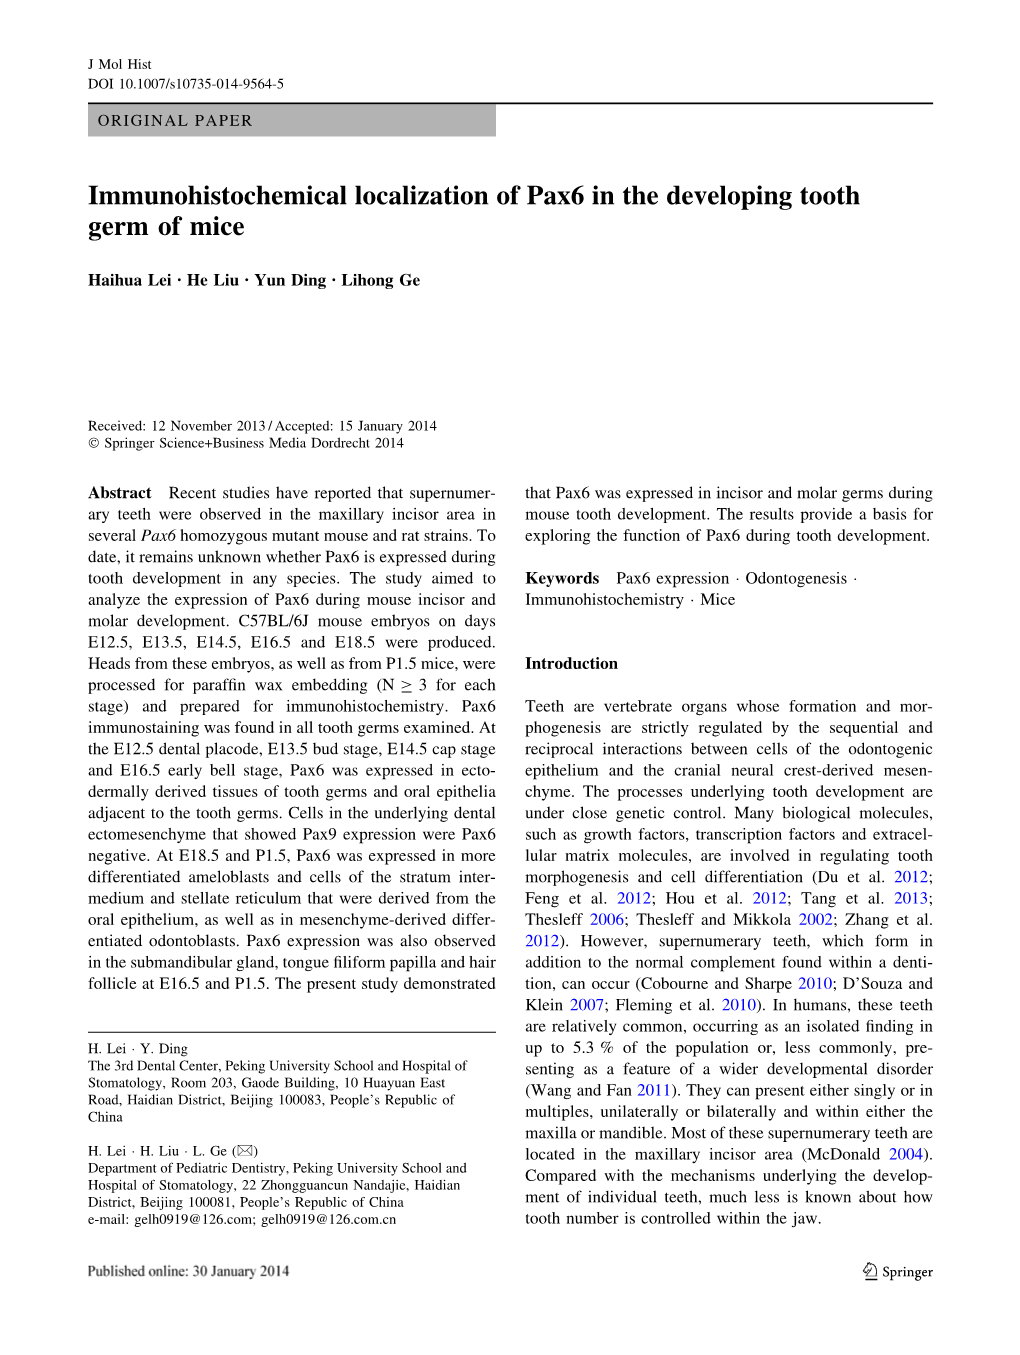 Immunohistochemical Localization of Pax6 in the Developing Tooth Germ of Mice